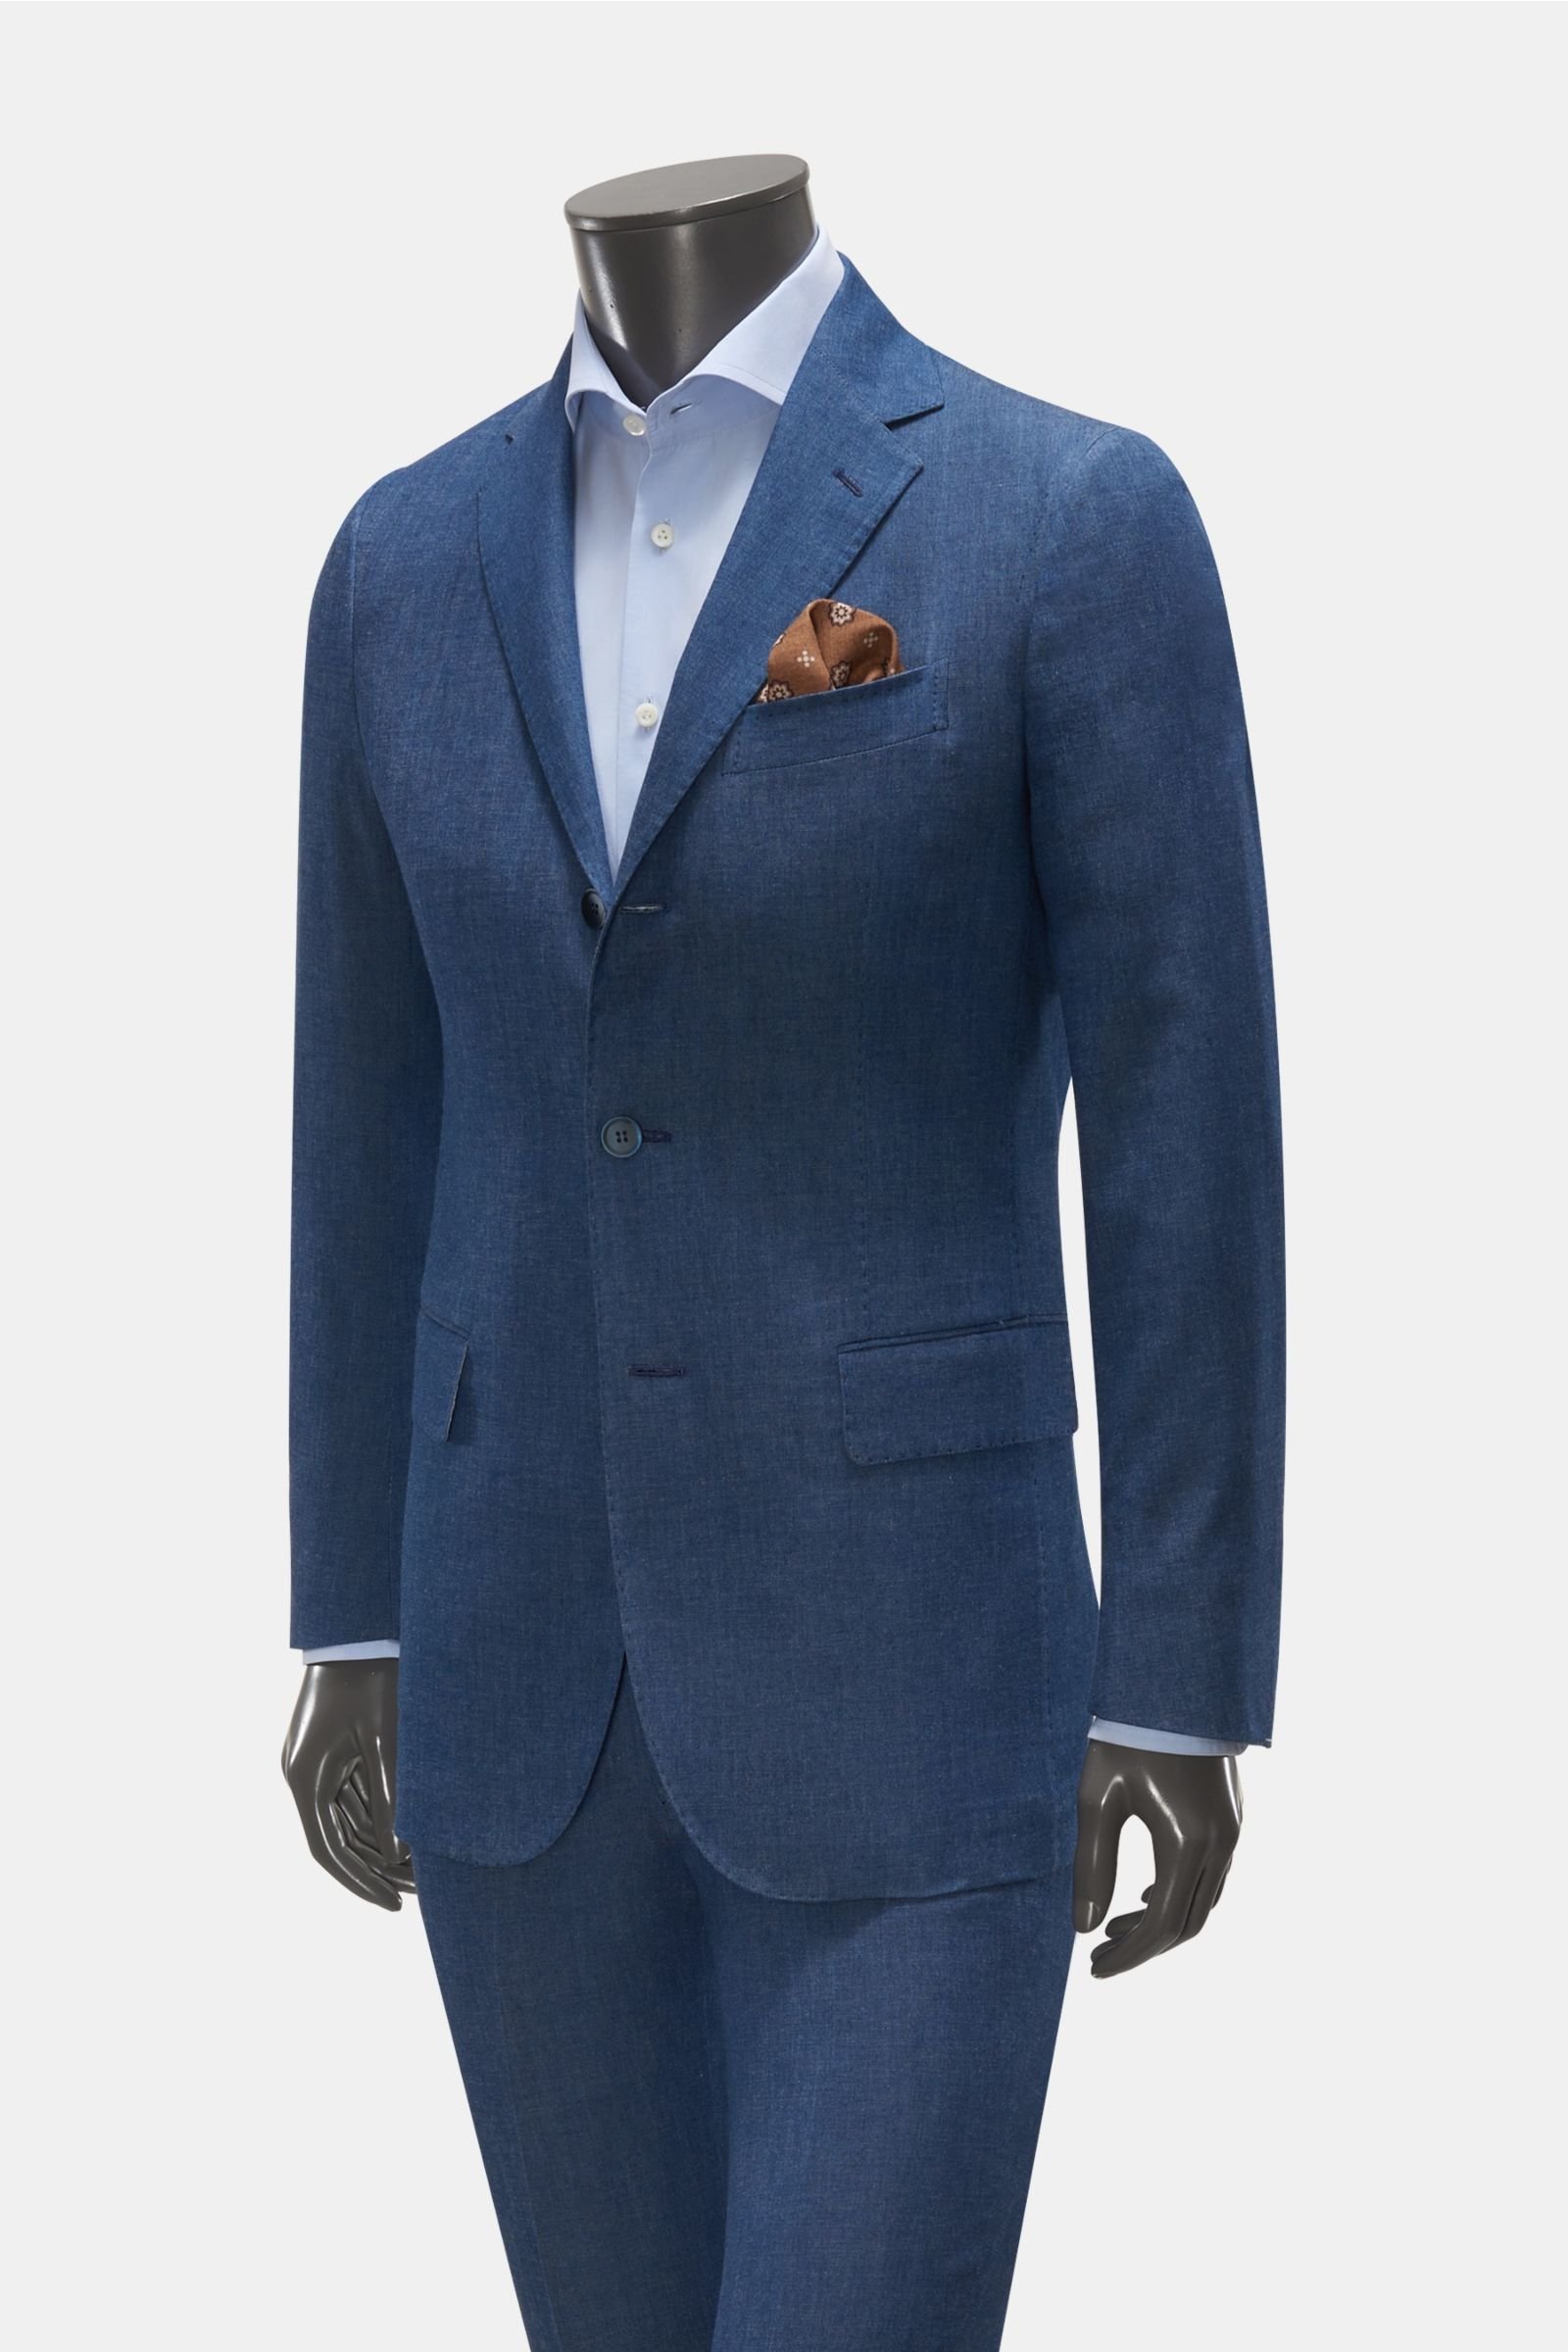 Chambray suit navy